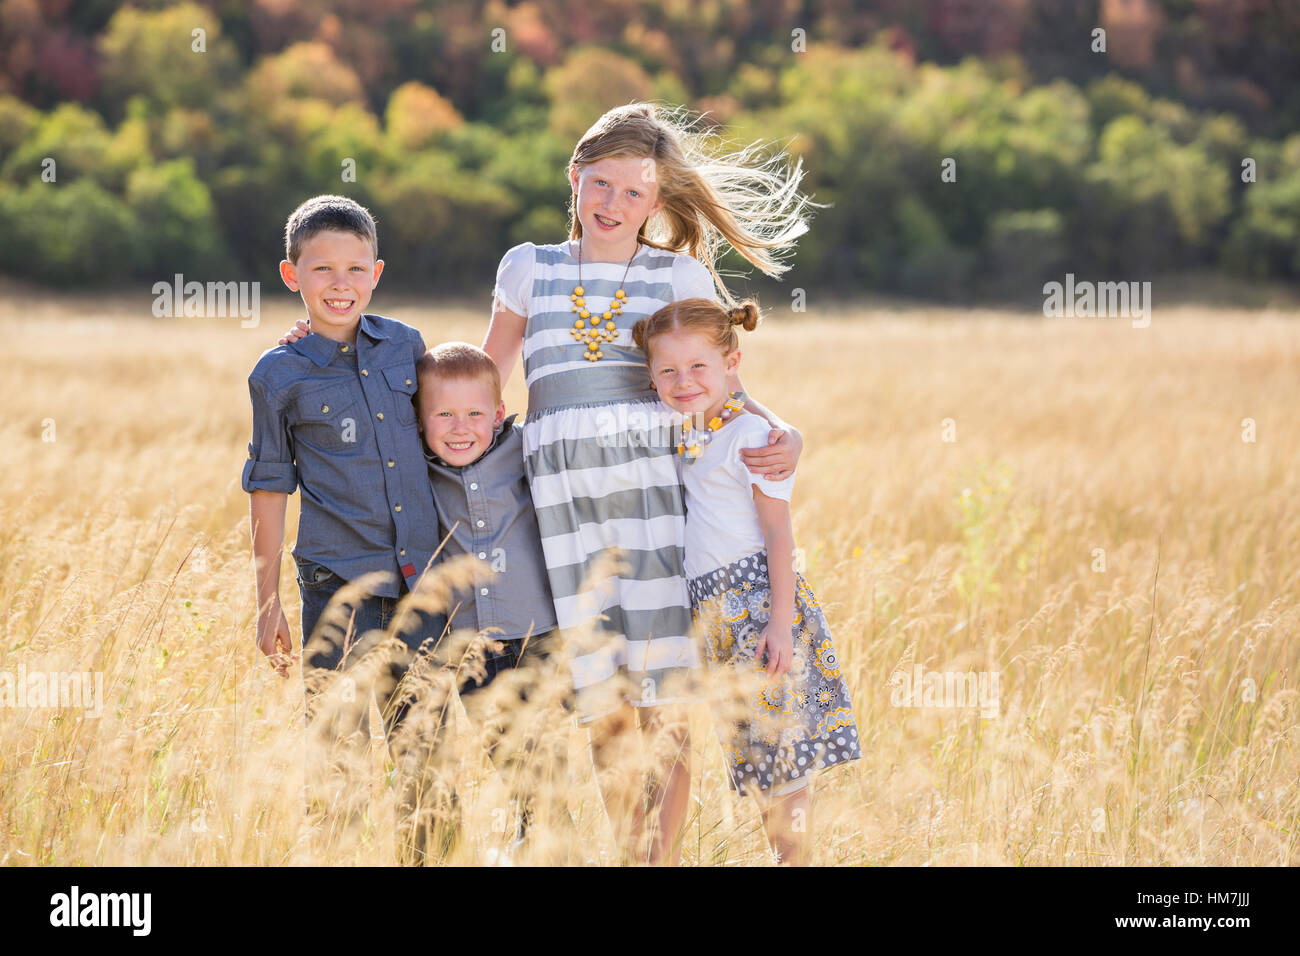 Boys and girls (4-5, 6-7, 8-9) standing in field, embracing Stock Photo